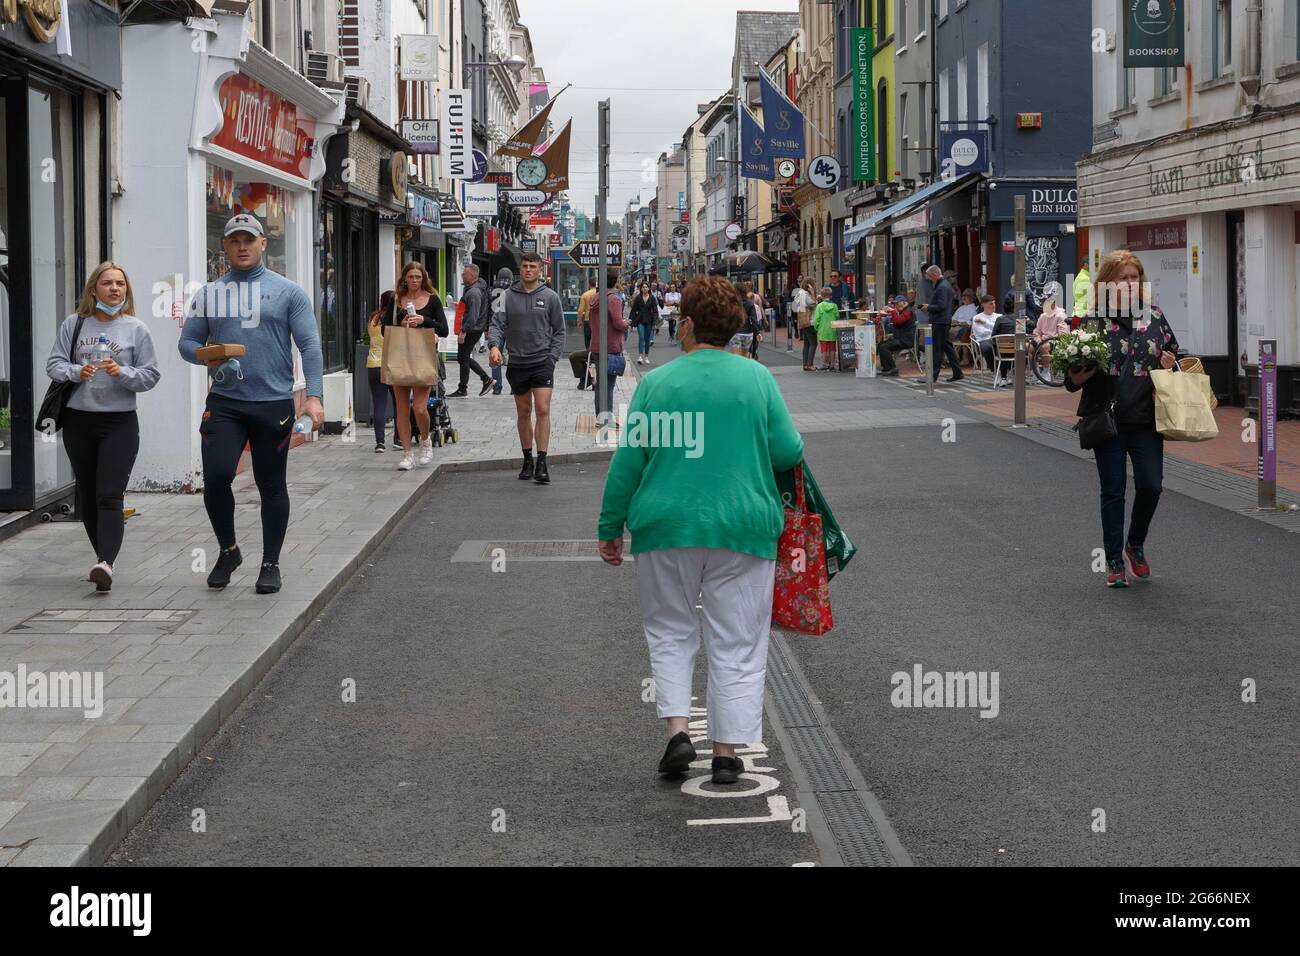 Cork, Ireland. 3rd July, 2021. Shoppers Brave City Despite Thunderstorms Forecasted, Cork, Ireland. Many shoppers braved the city today despite mixed weather forecasts throughout the day. The sun shined on the city for the majority of the afternoon with some scattered showers and as well as forecast thunderstorms in the afternoon. Credit: Damian Coleman/Alamy Live News Stock Photo